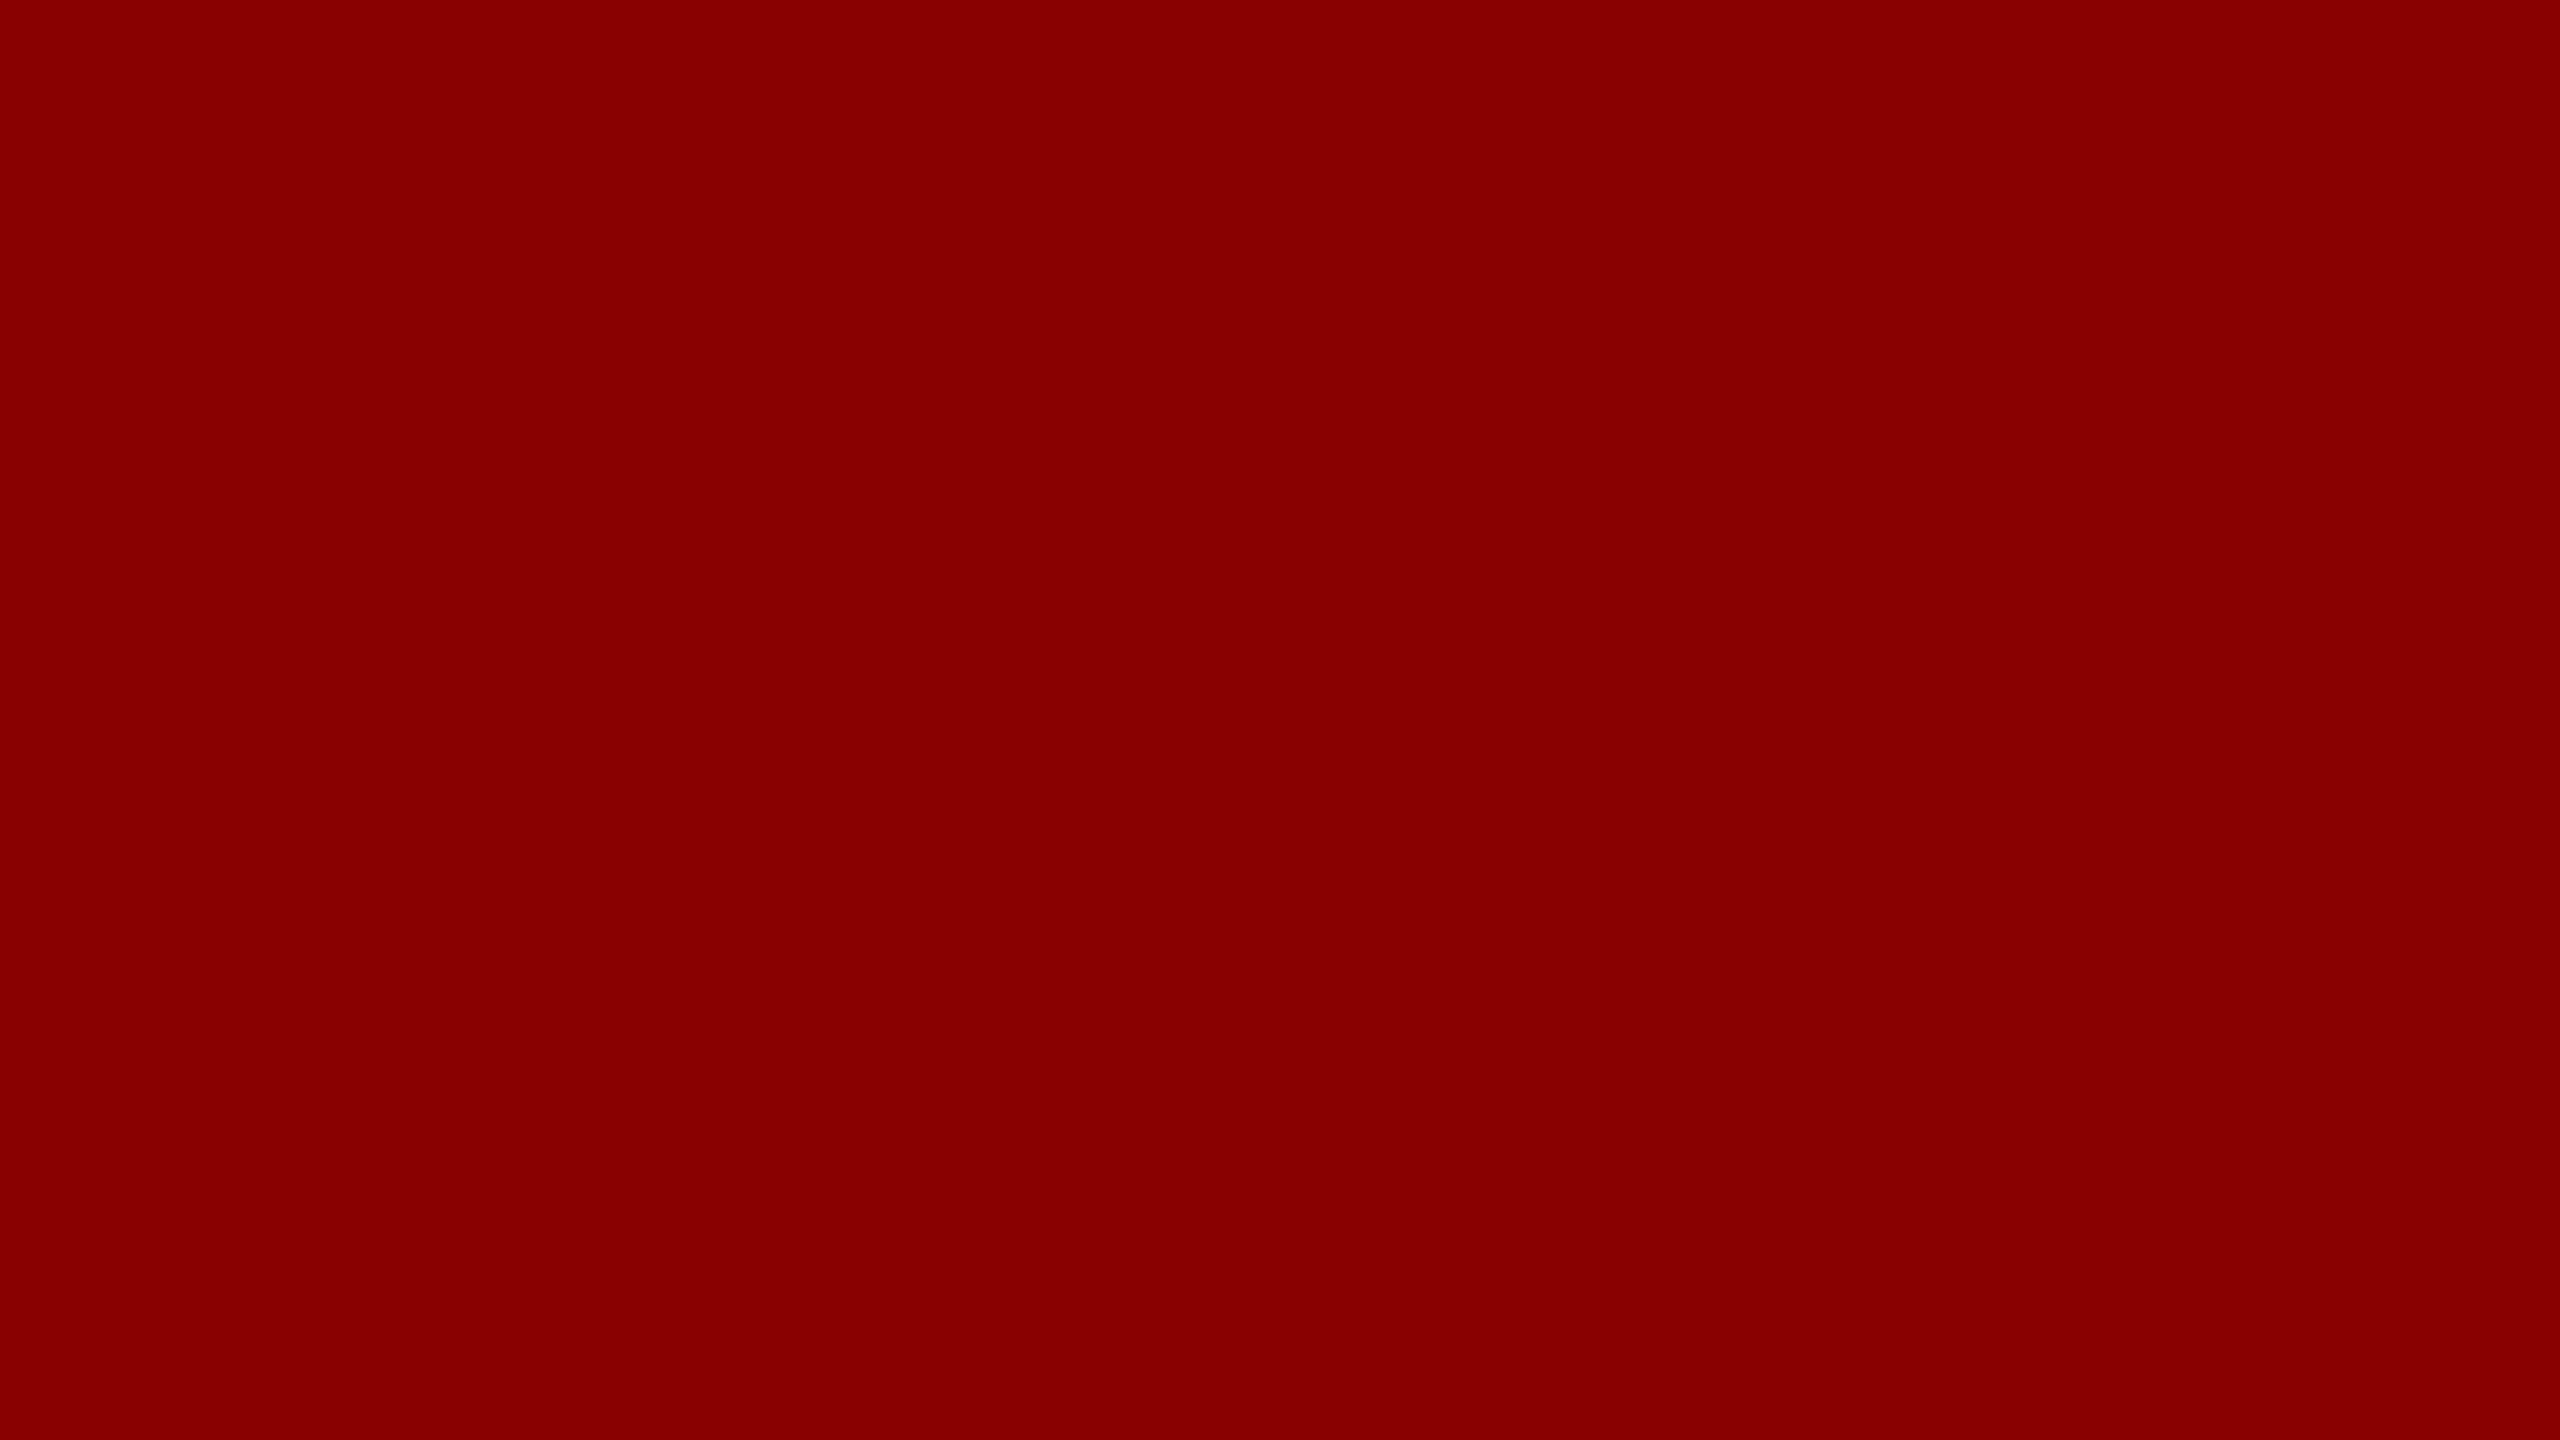 Dark Red Background Plain Red Color